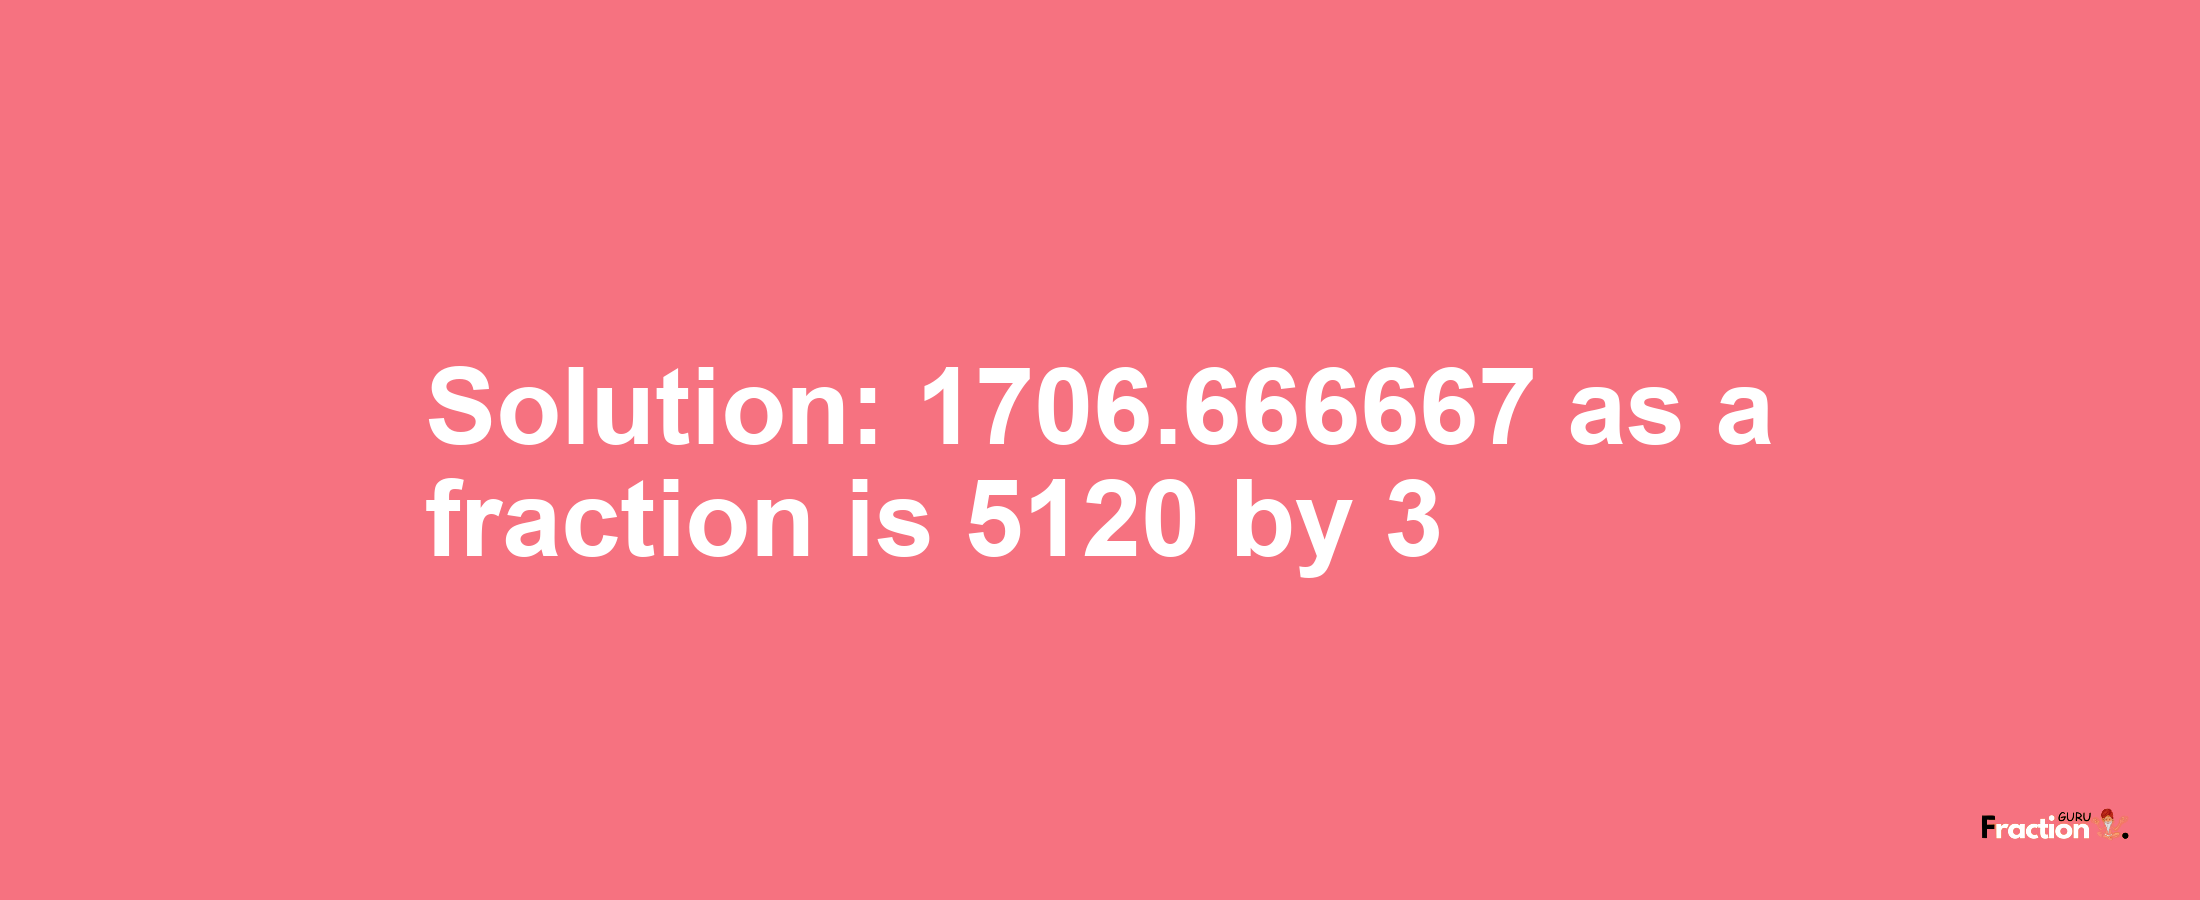 Solution:1706.666667 as a fraction is 5120/3